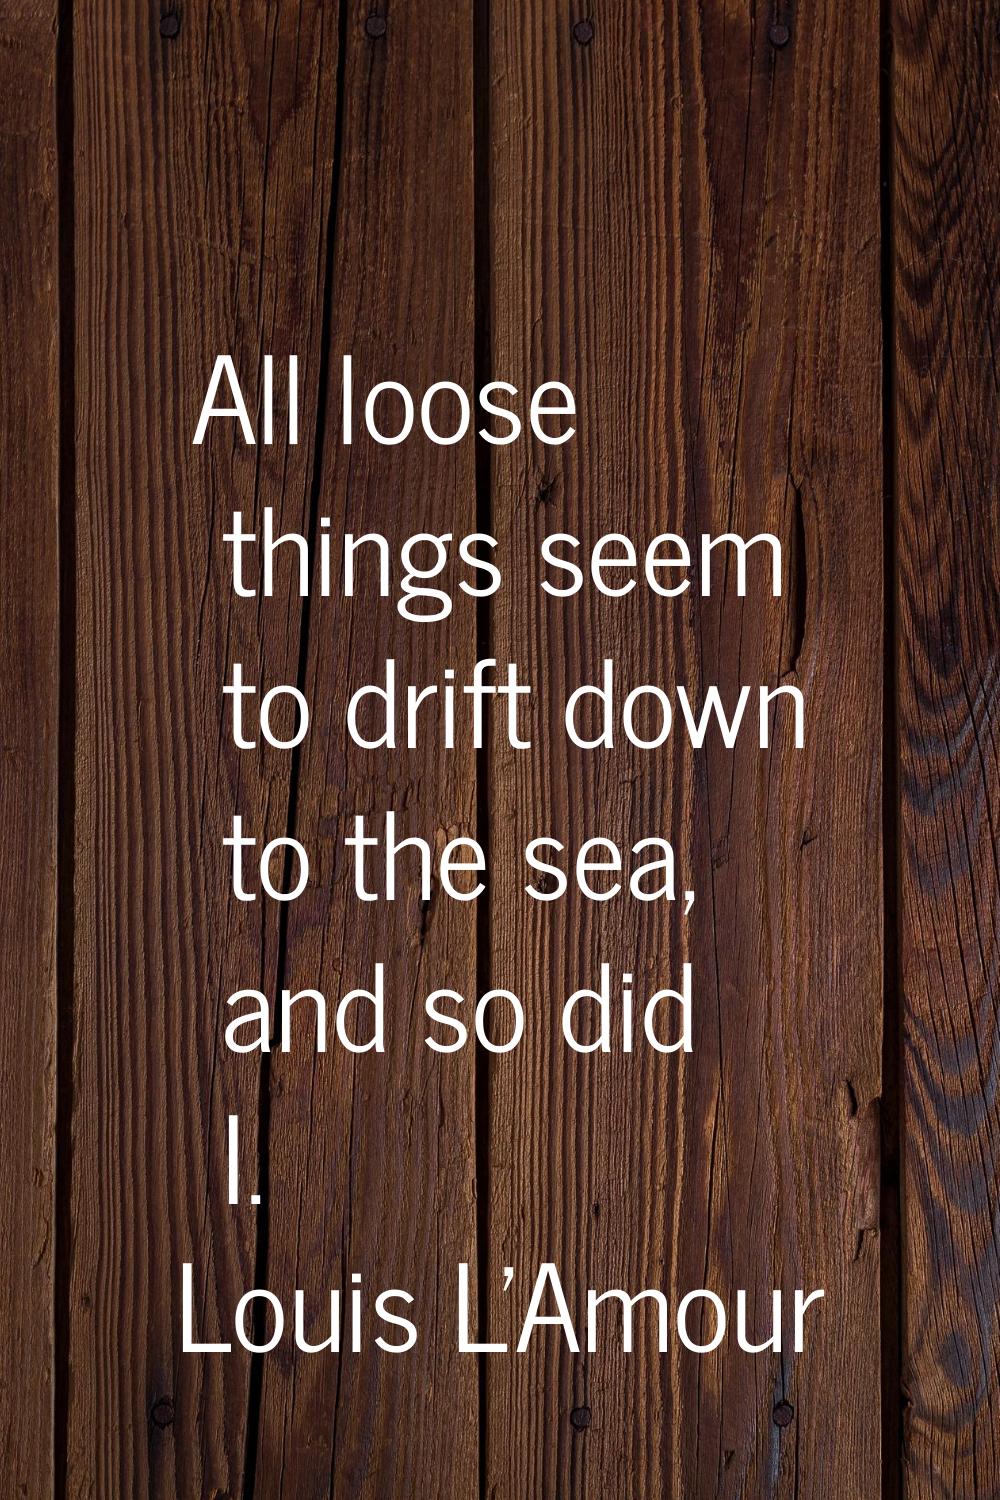 All loose things seem to drift down to the sea, and so did I.